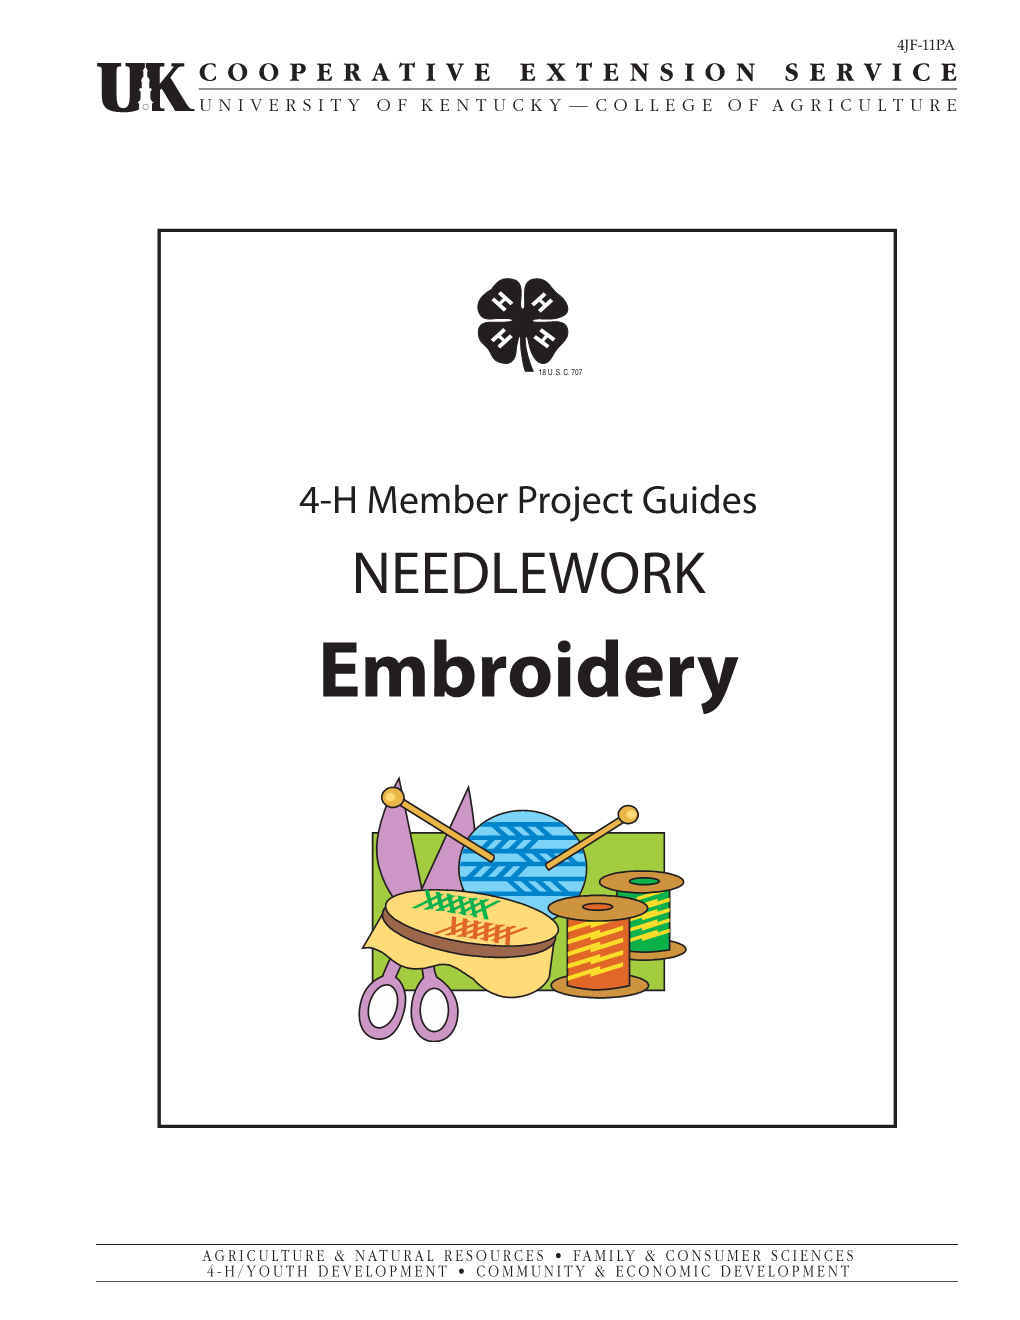 4JF11PA: 4-H Member Project Guides, Needlework, Embroidery